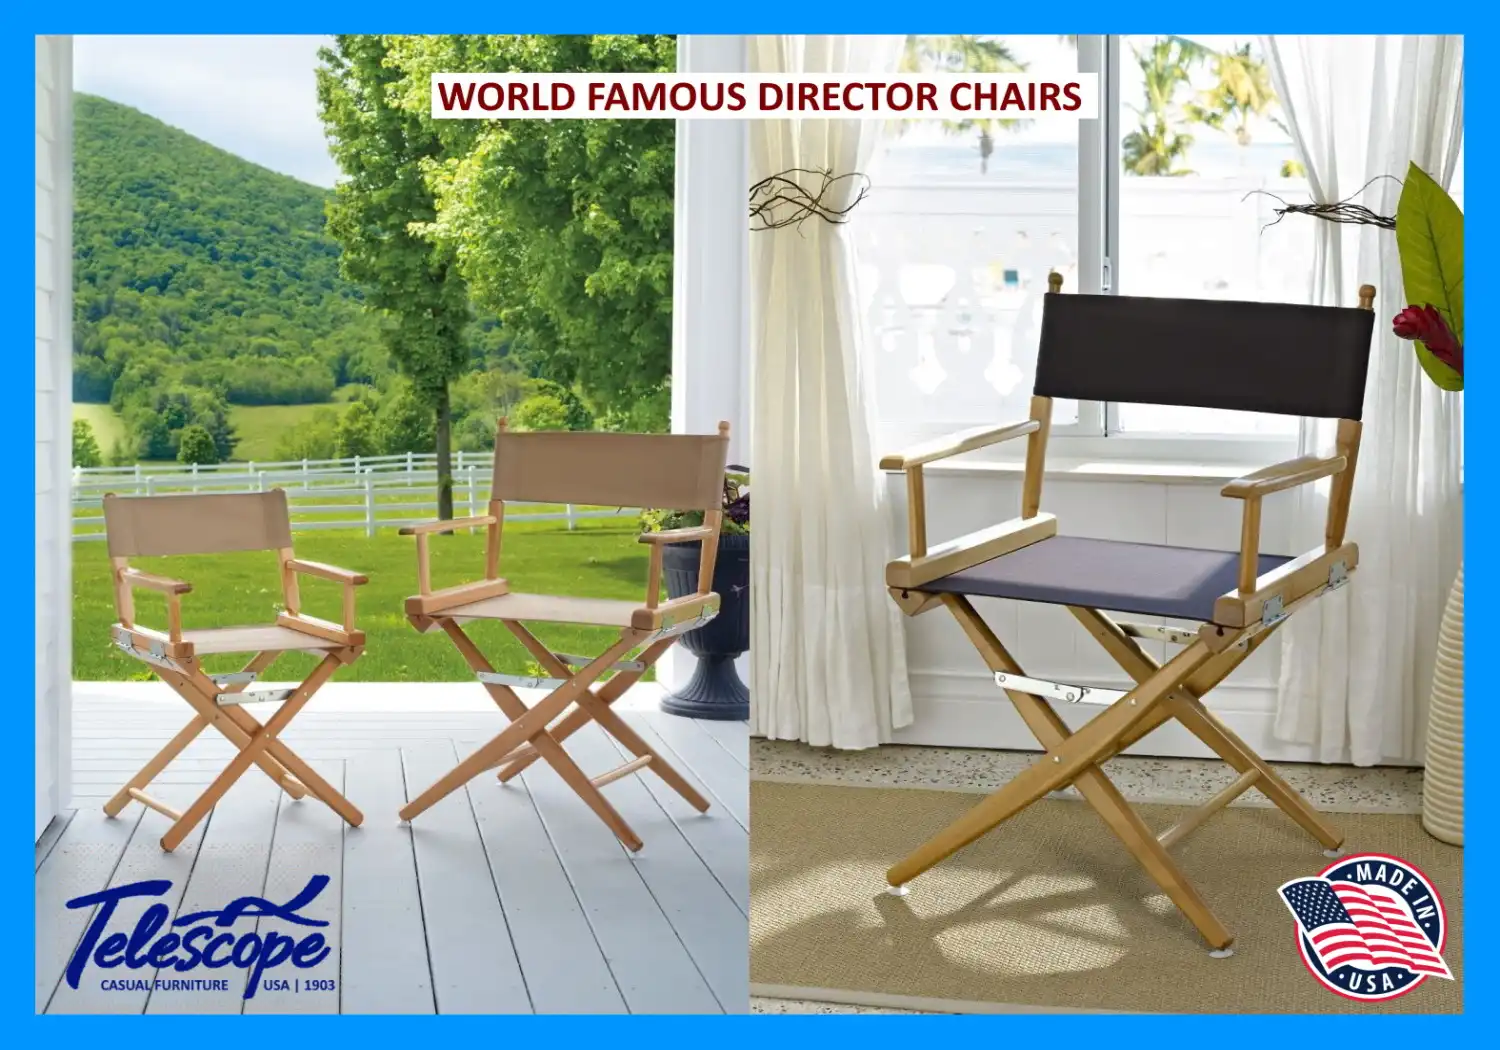 WORLD FAMOUS DIRECTOR CHAIRS